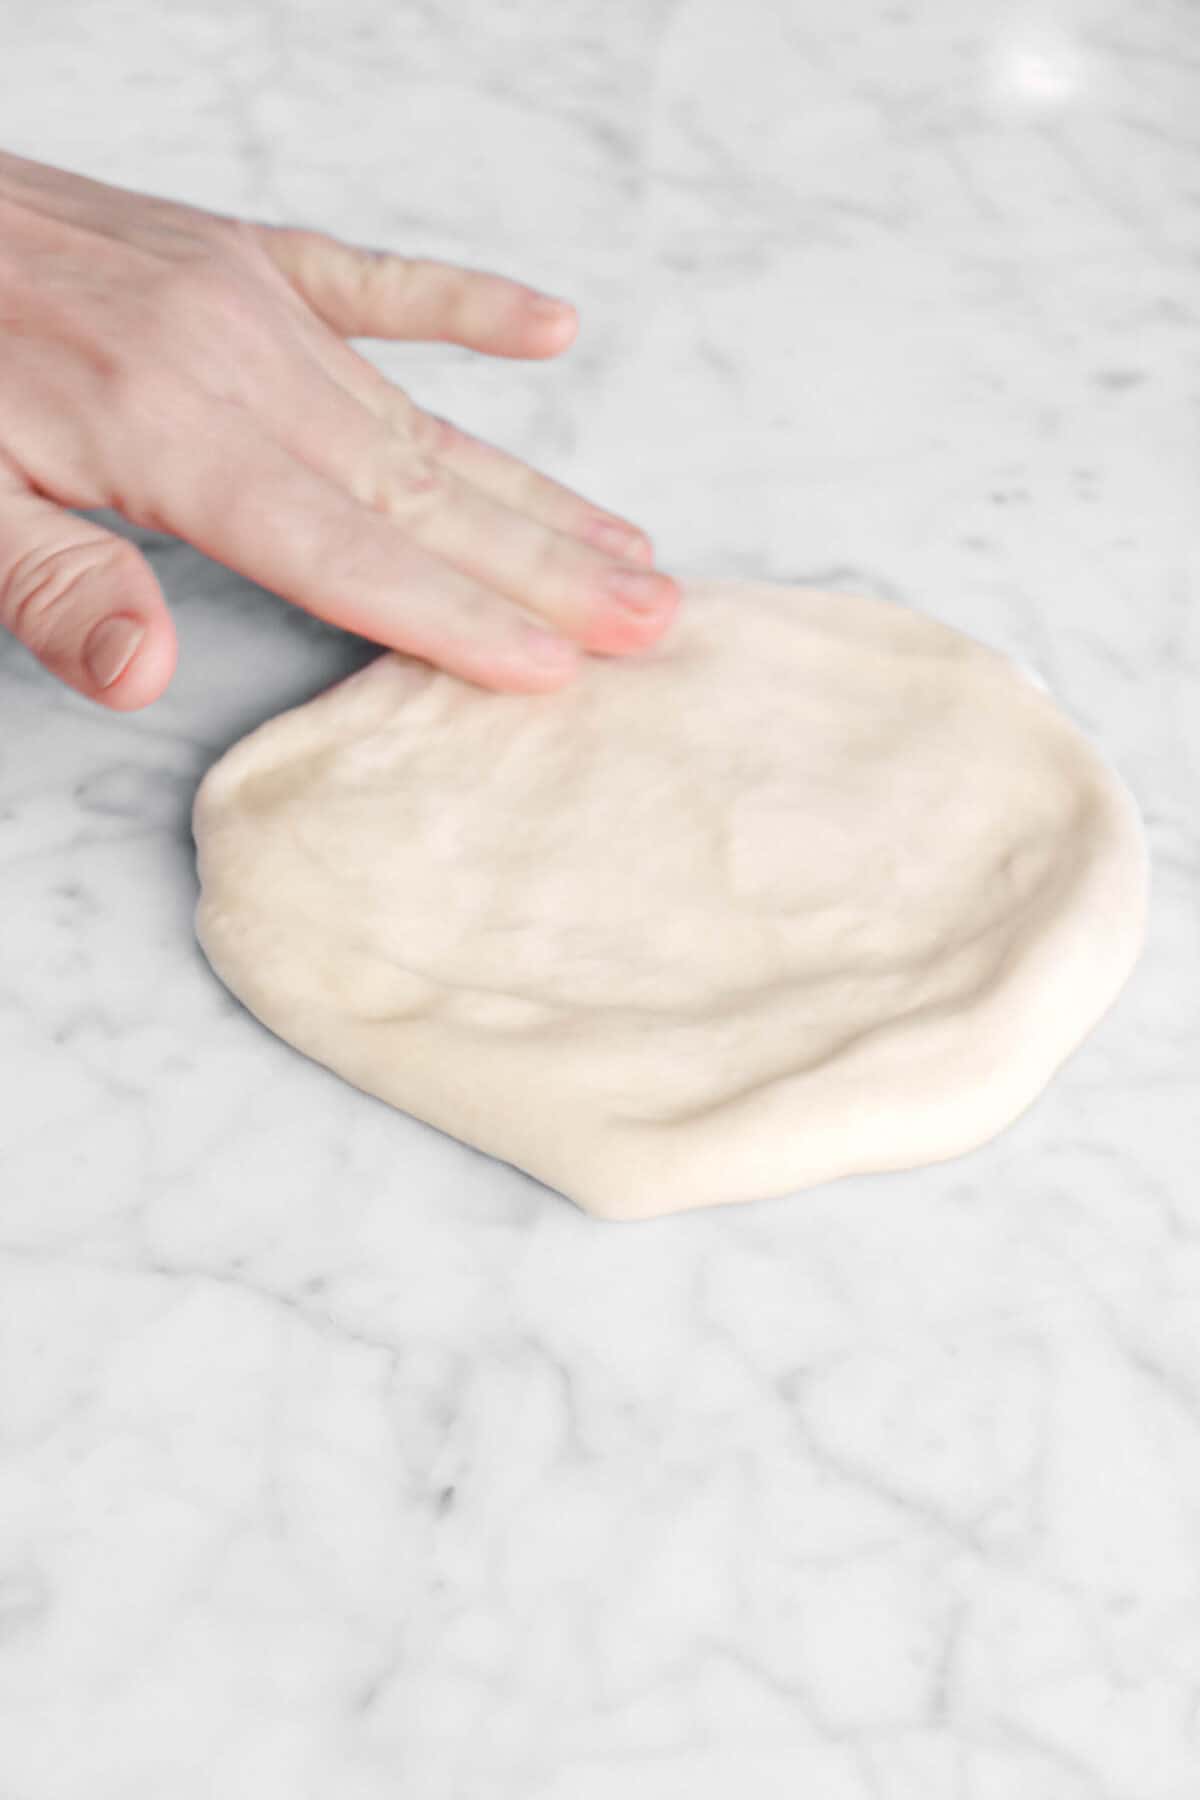 naan being pressed out on marble counter